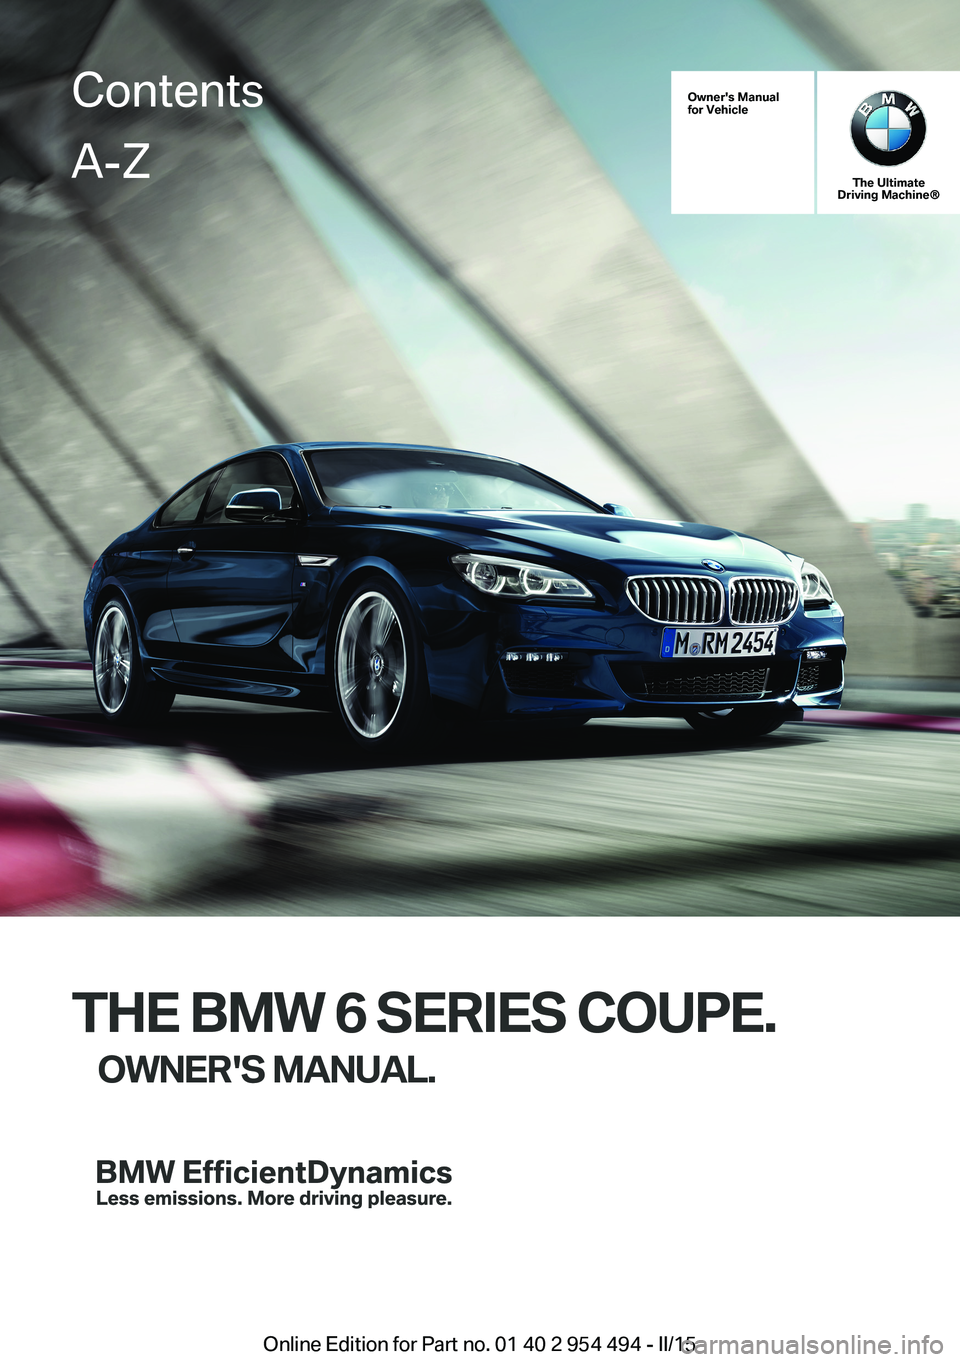 BMW 640I COUPE 2016  Owners Manual Owner's Manualfor Vehicle
The UltimateDriving Machine®
THE BMW 6 SERIES COUPE.
OWNER'S MANUAL.ContentsA-Z
Online Edition for Part no. 01 40 2 954 494 - II/15   